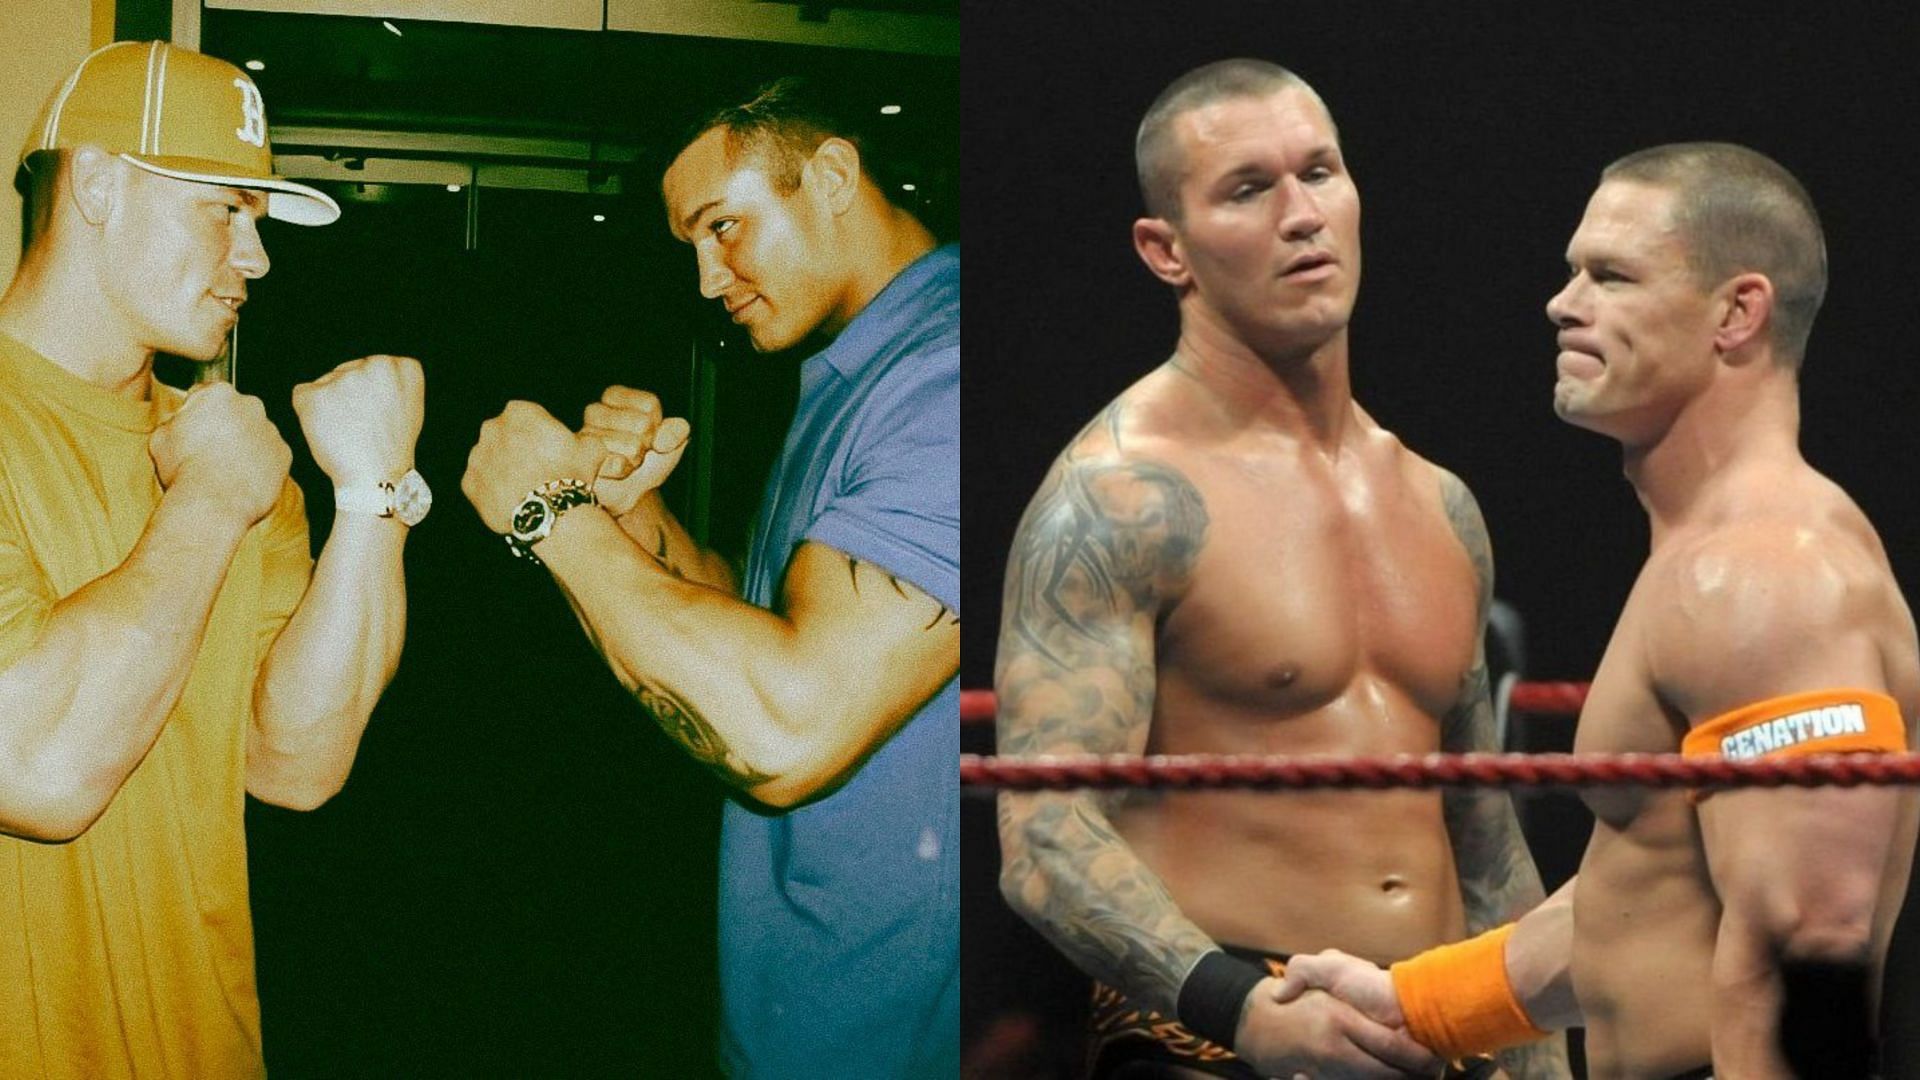 John Cena and Randy Orton had a heated real-life argument in 2002